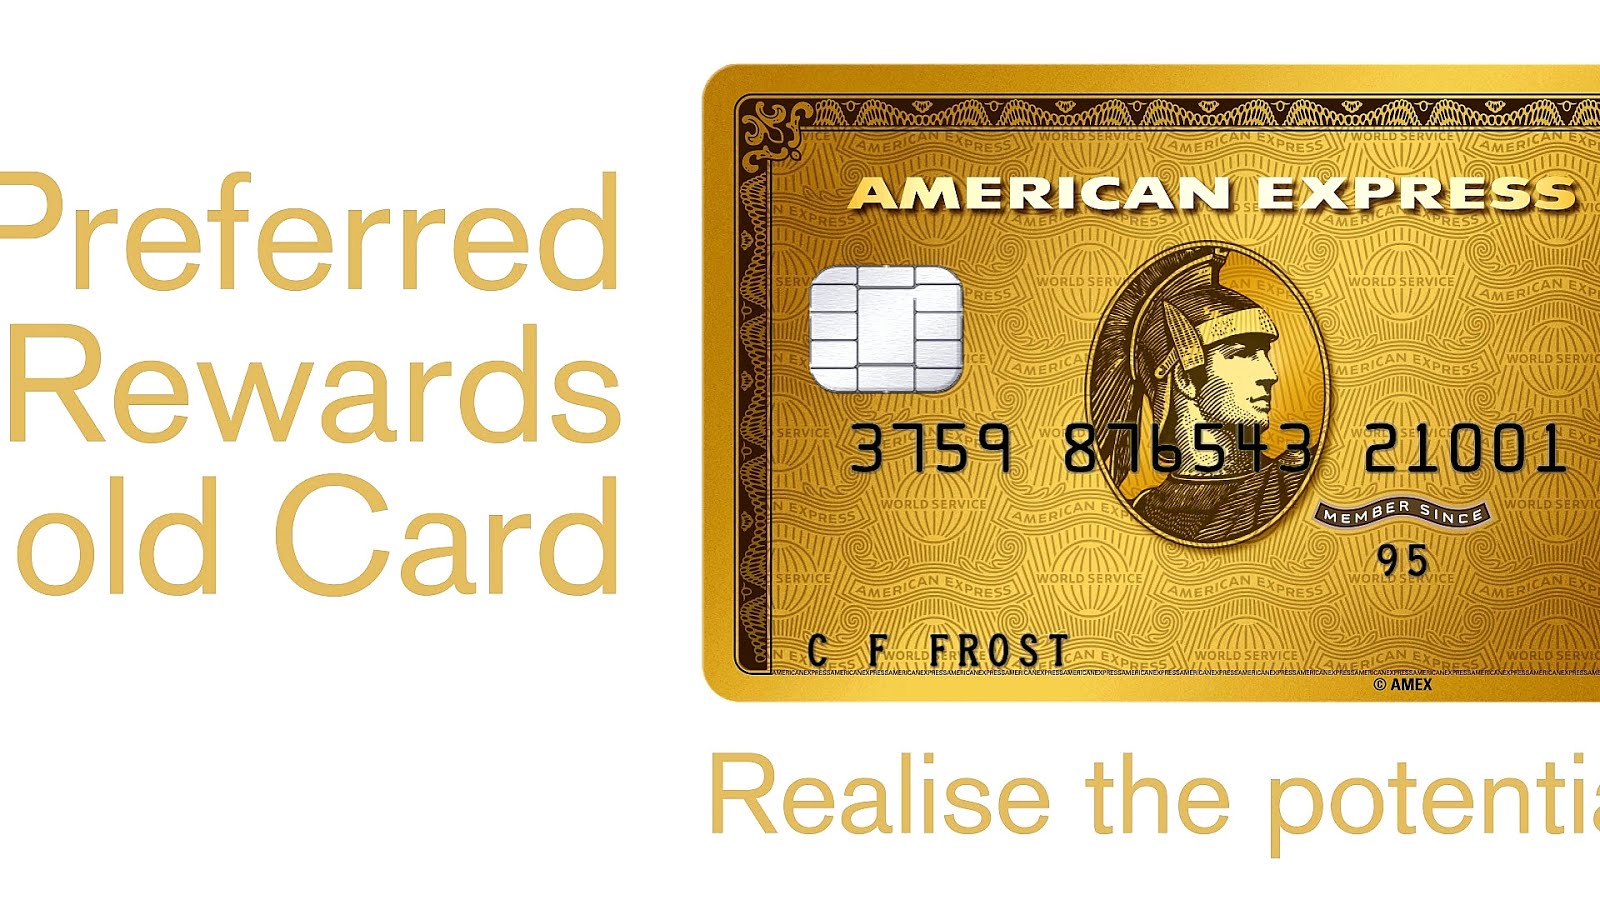 Untitled Inspiration On Instagram American Express Gold Card By Lizzy Gardiner Conceptual Fashion American Express Gold American Express Gold Card